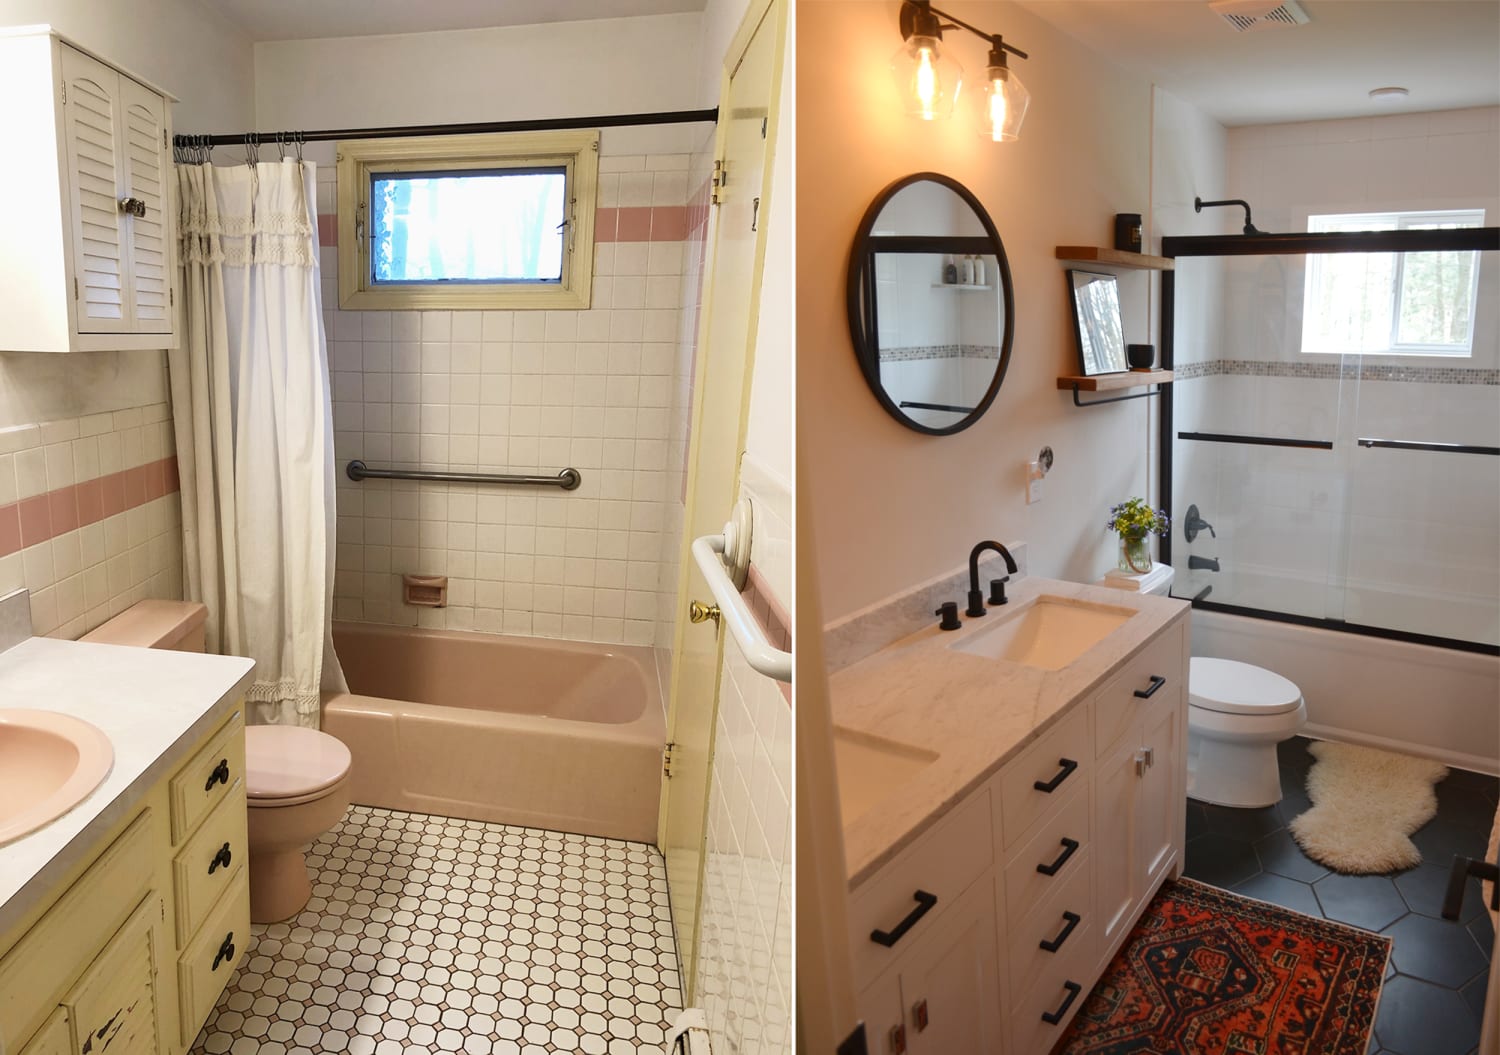 How To Diy A Bathroom Renovation During, 1960 Small Bathroom Remodel